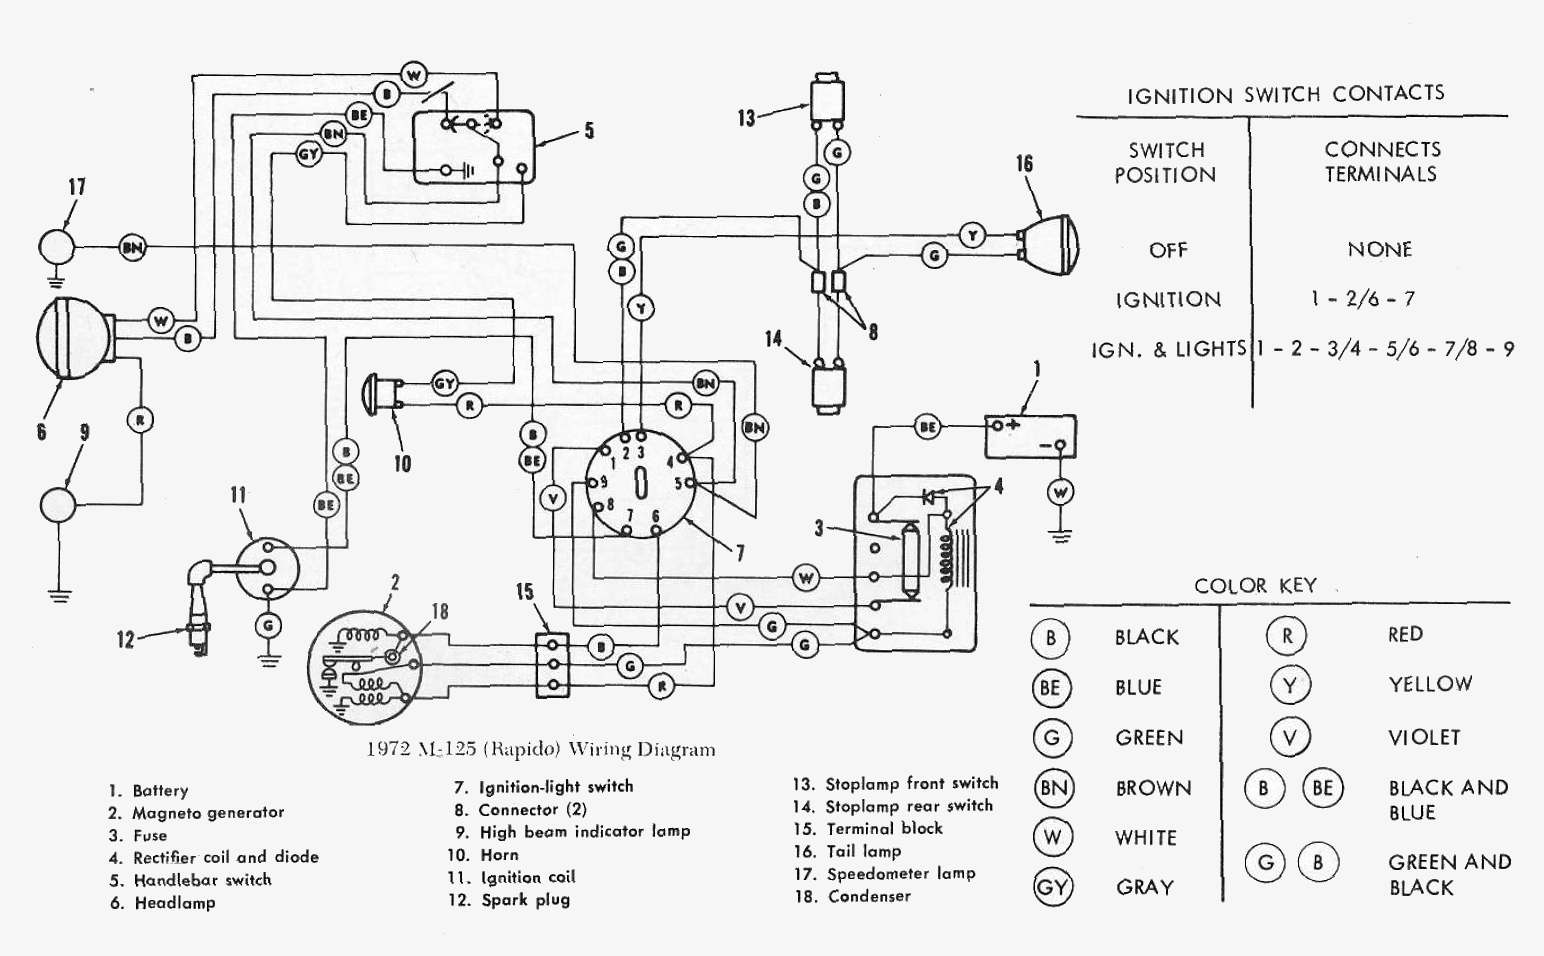 Dan's Motorcycle "Various Wiring Systems and Diagrams"